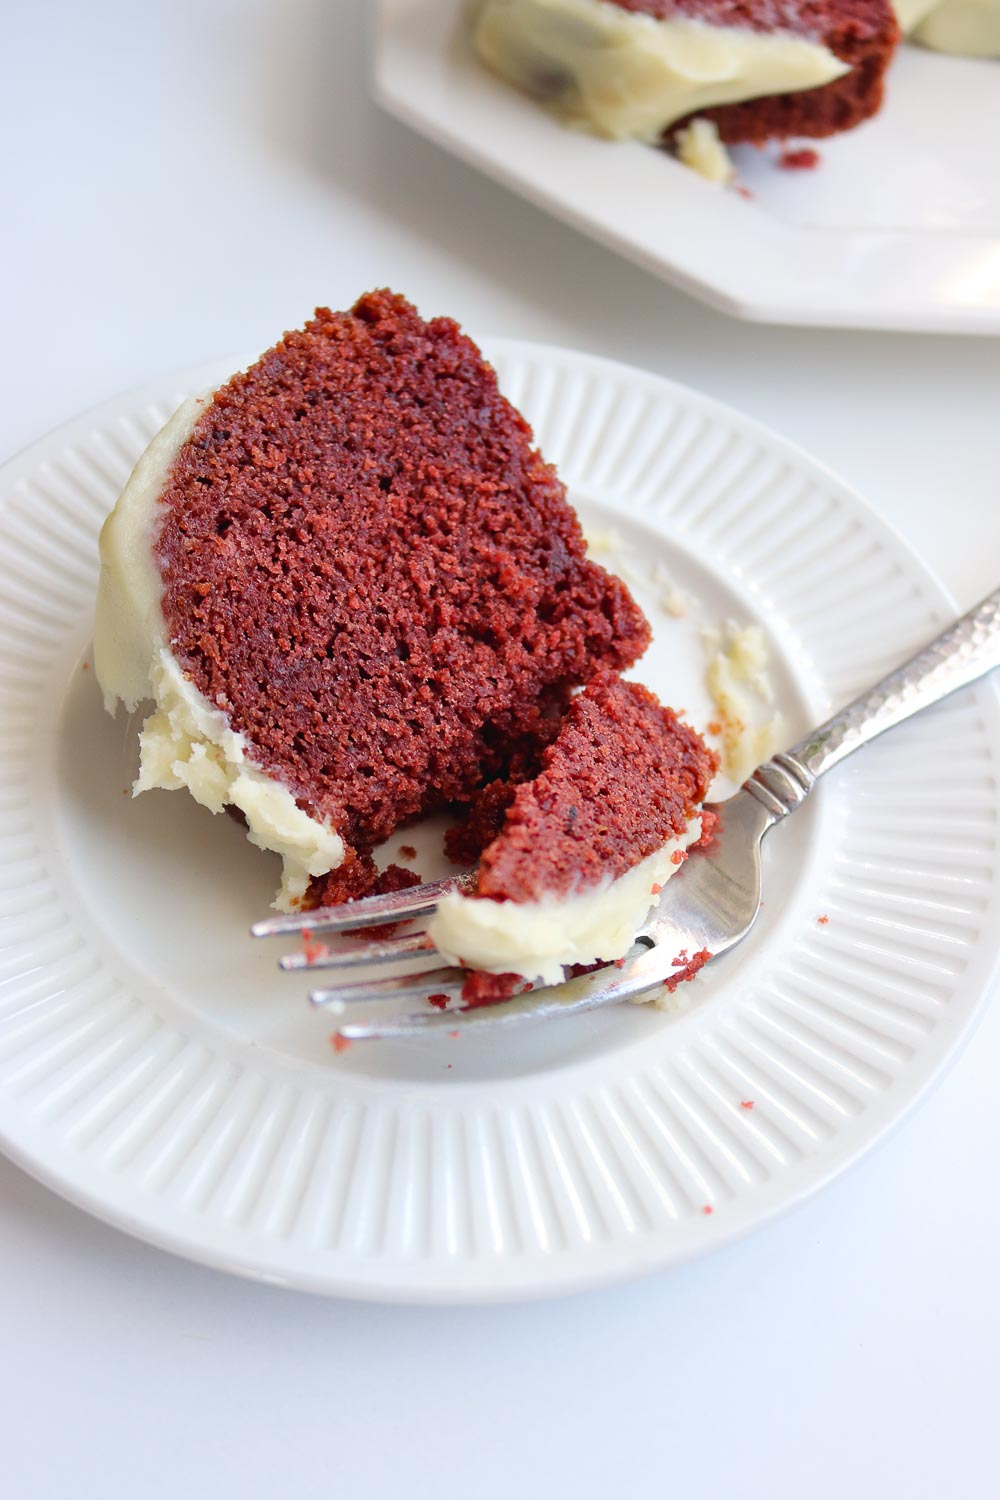 A Nothing Bundt Cake copycat that hits the mark: ultra moist red velvet bundt cake topped with deliciously fluffy cream cheese frosting. This red velvet bundt cake is the easiest from scratch bundt cake you'll ever make! Discover all my secrets to keeping the cake moist and fluffy!